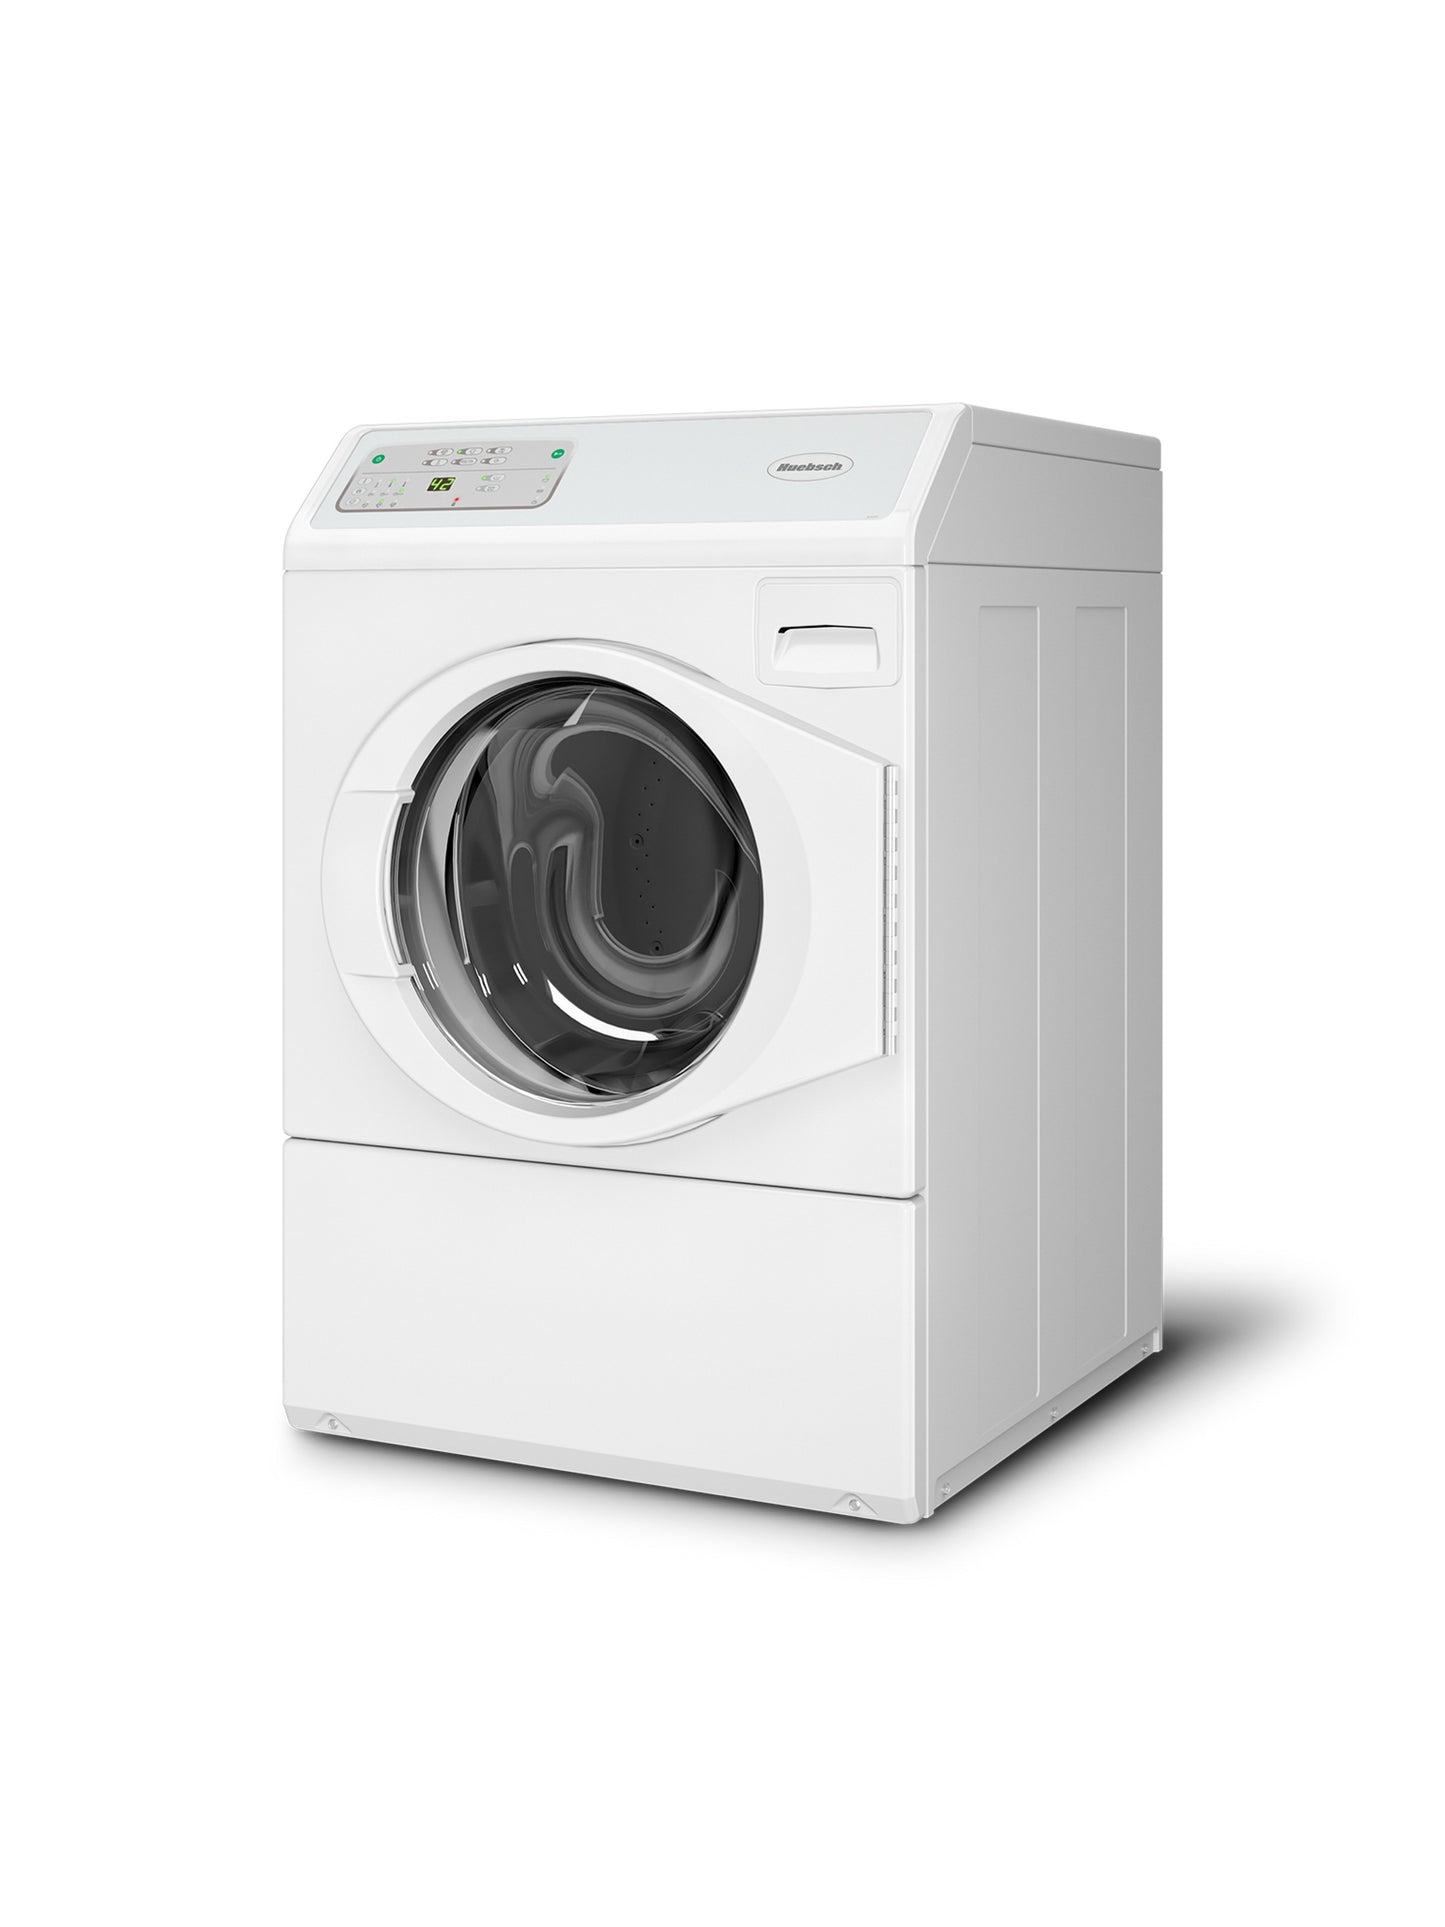 ON-PREMISE FRONT LOAD WASHER - ELECTRONIC